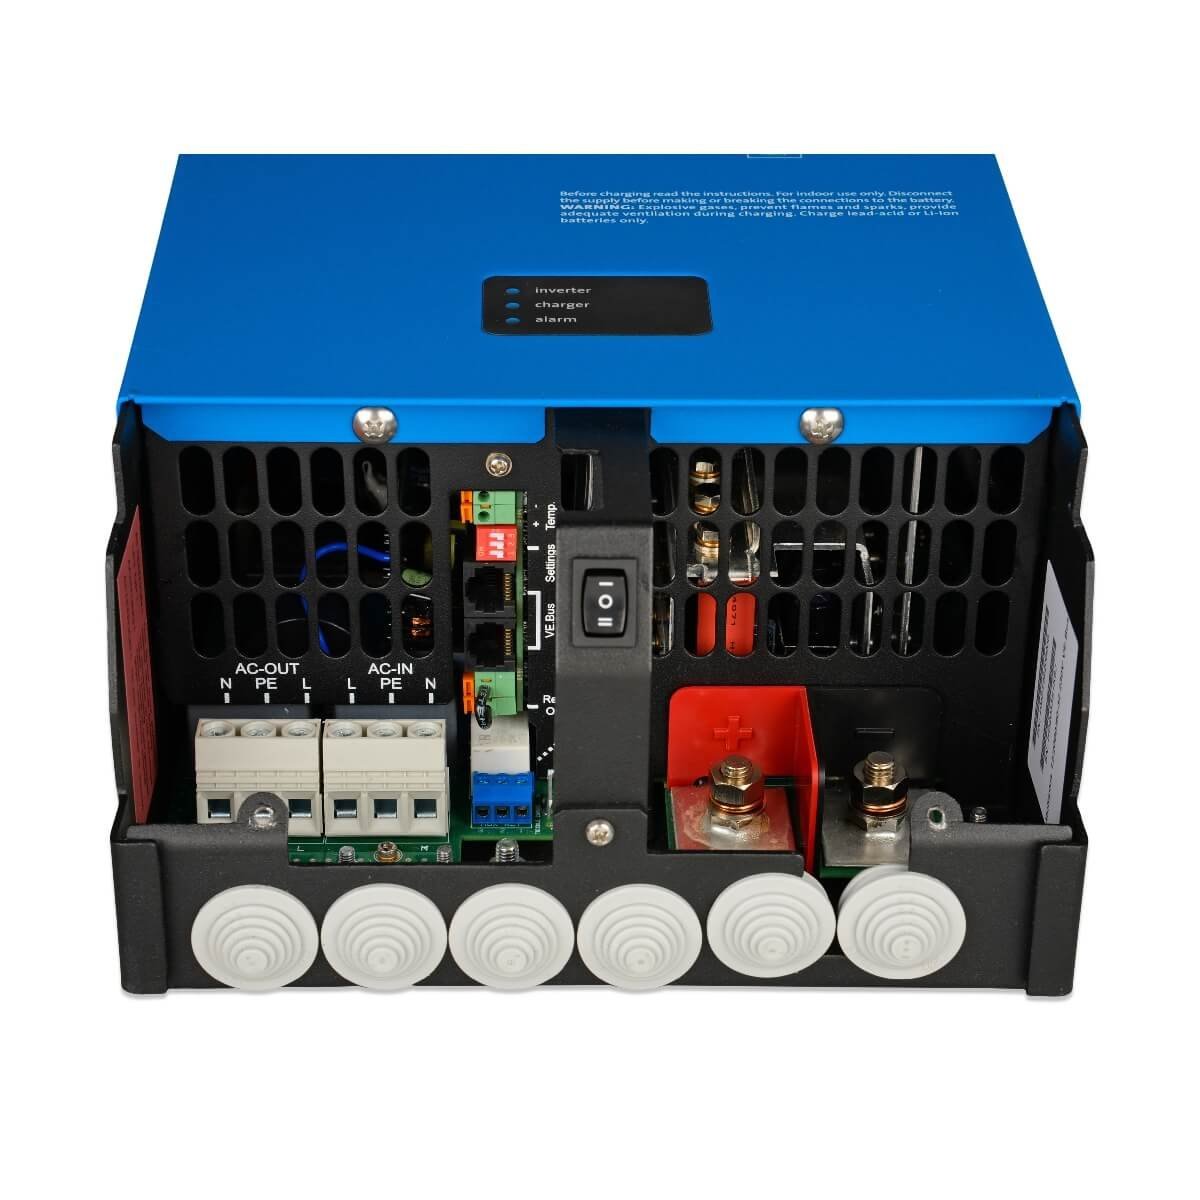 The blue and black electronic device, known as the Victron MultiPlus 24V 2000VA Inverter/Charger, features various ports, switches, and connectors on the front panel. It includes a 24V inverter and boasts a powerful 2000VA charger for efficient energy management.